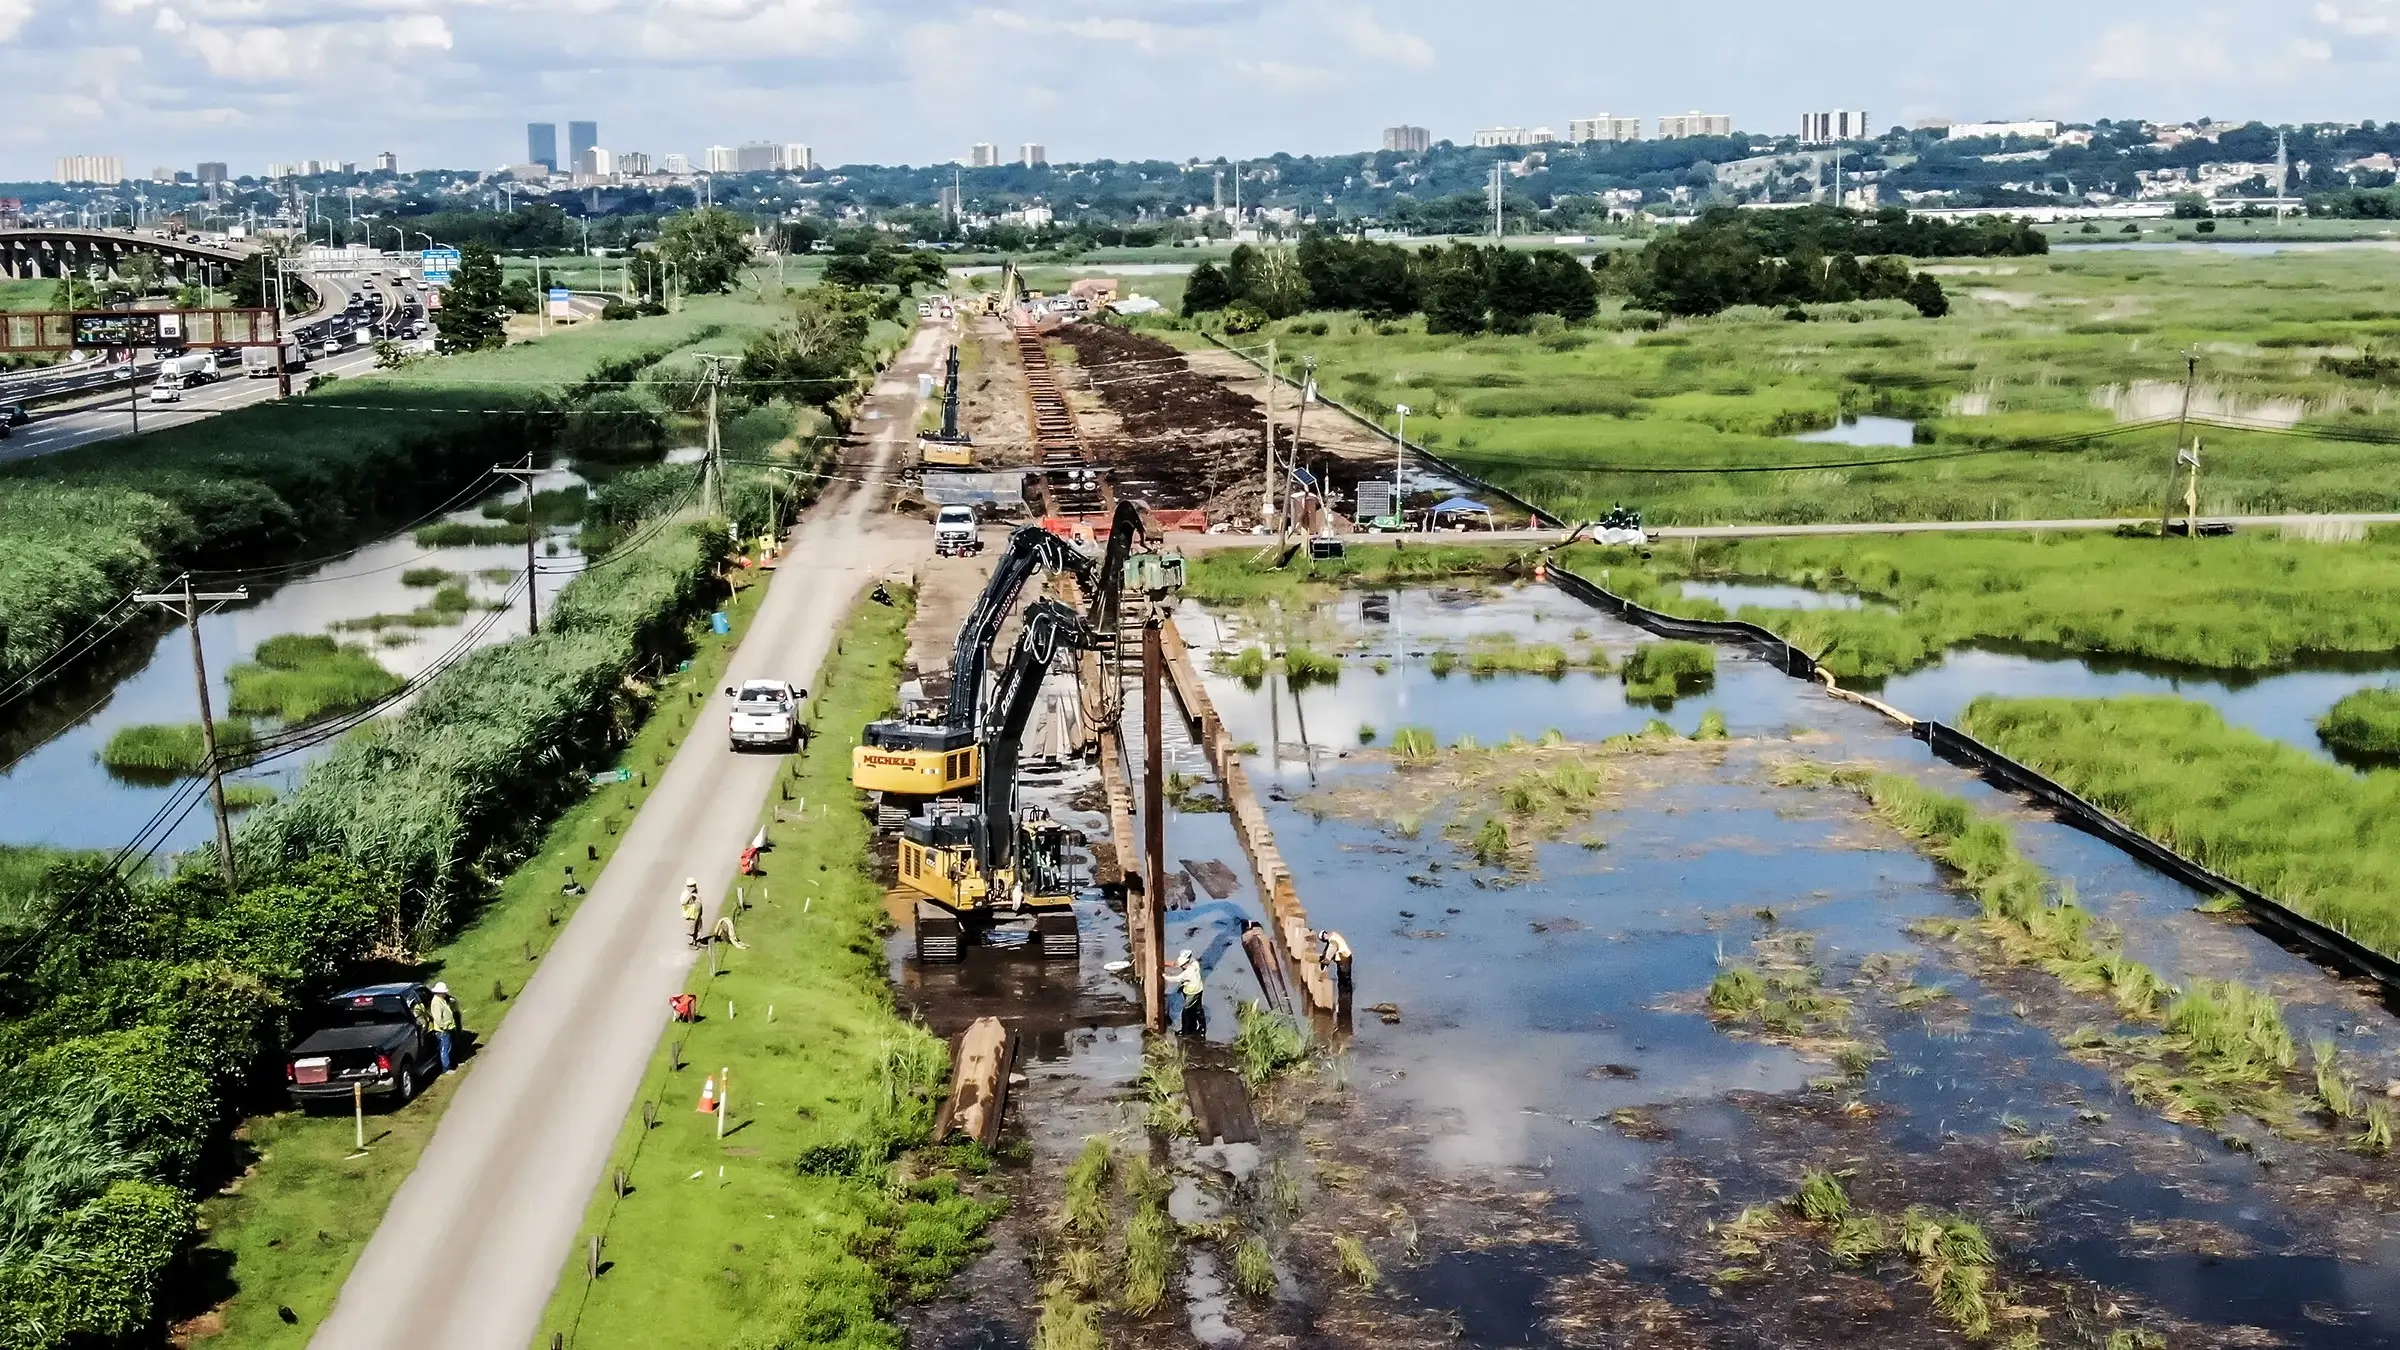 Large excavators work near a road and marsh